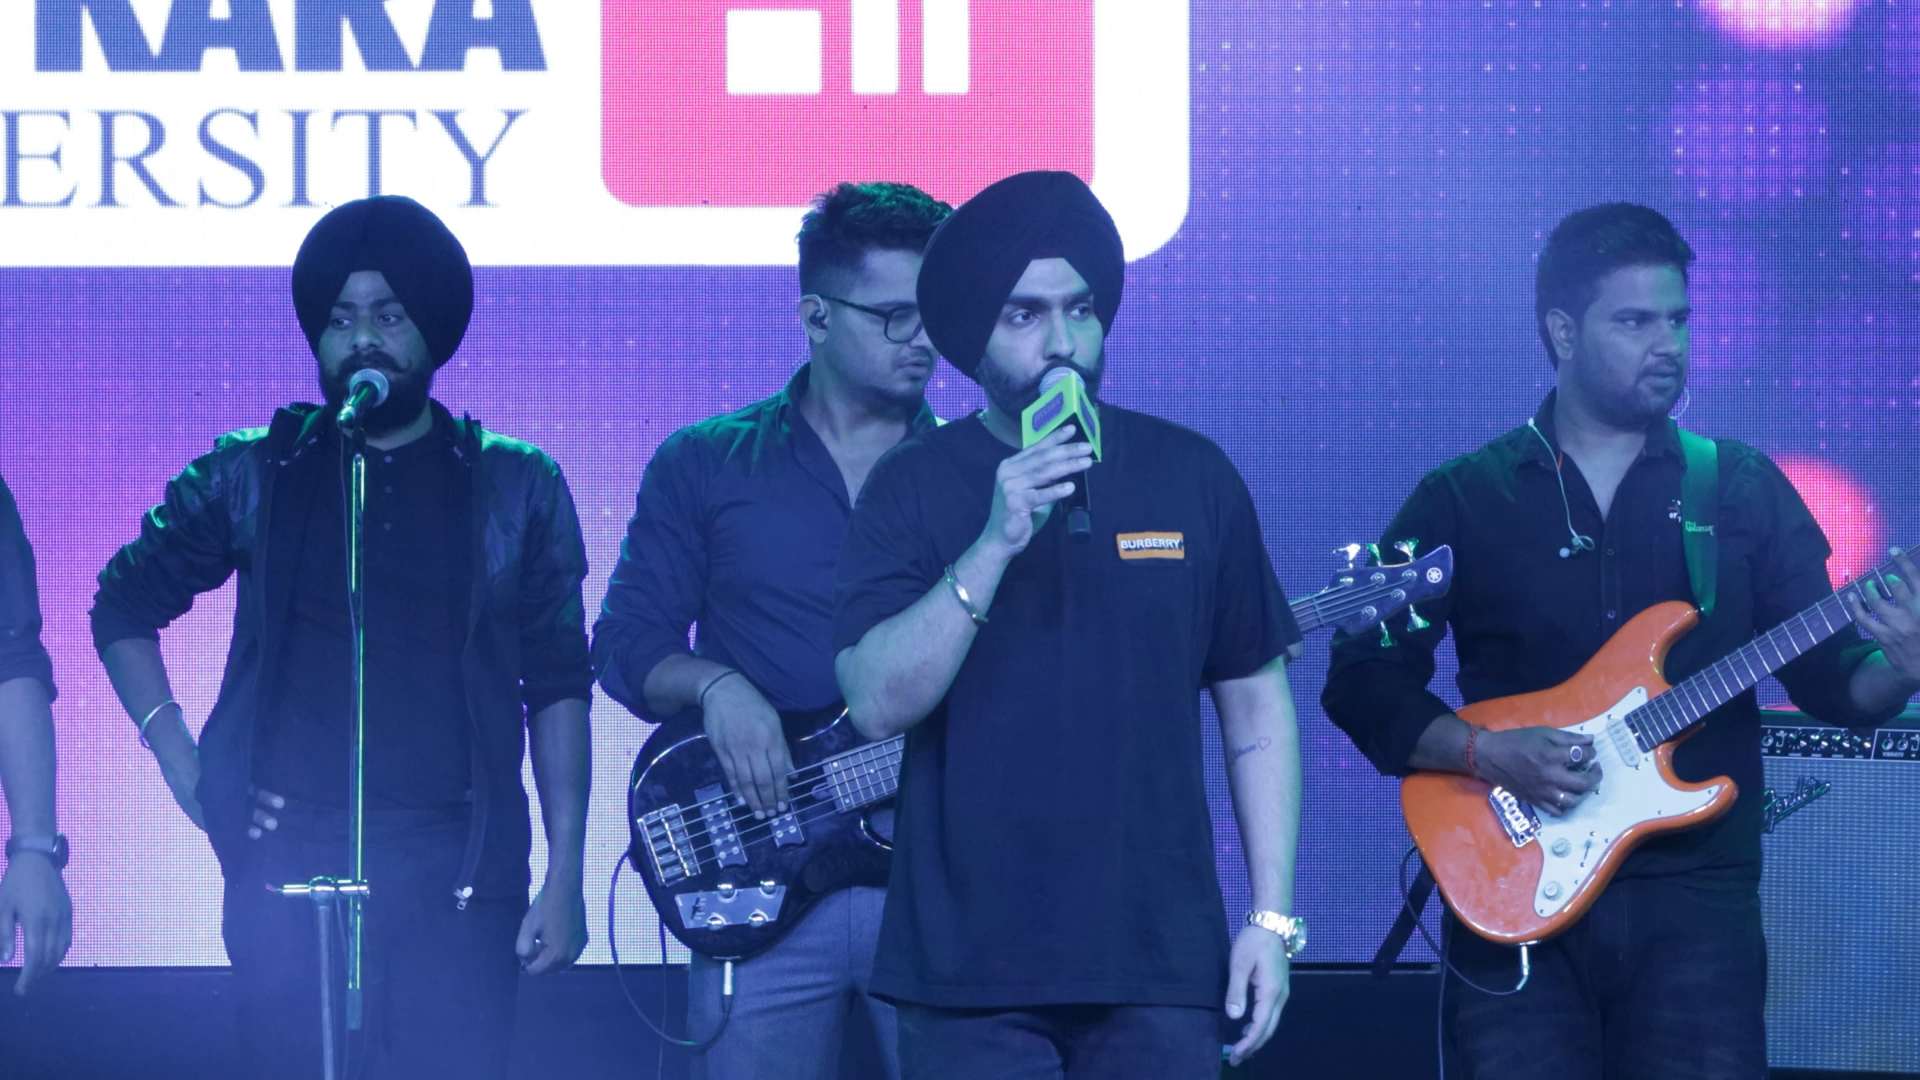 Ammy Virk: A Multifaceted Talent Shining in Punjabi Cinema, Bollywood, and Music